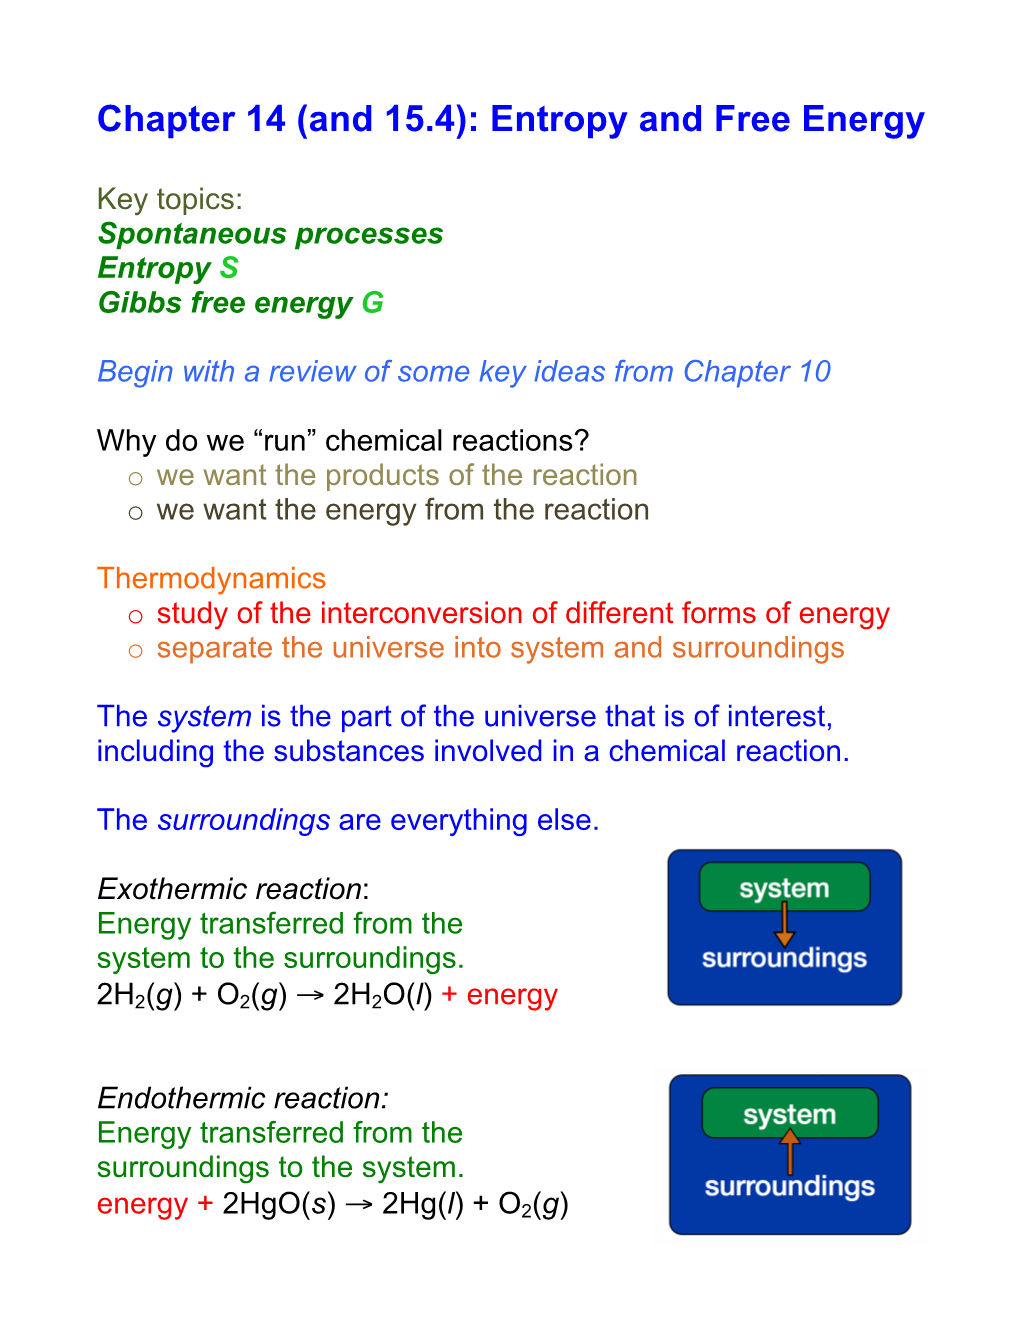 Chapter 14 (And 15.4): Entropy and Free Energy